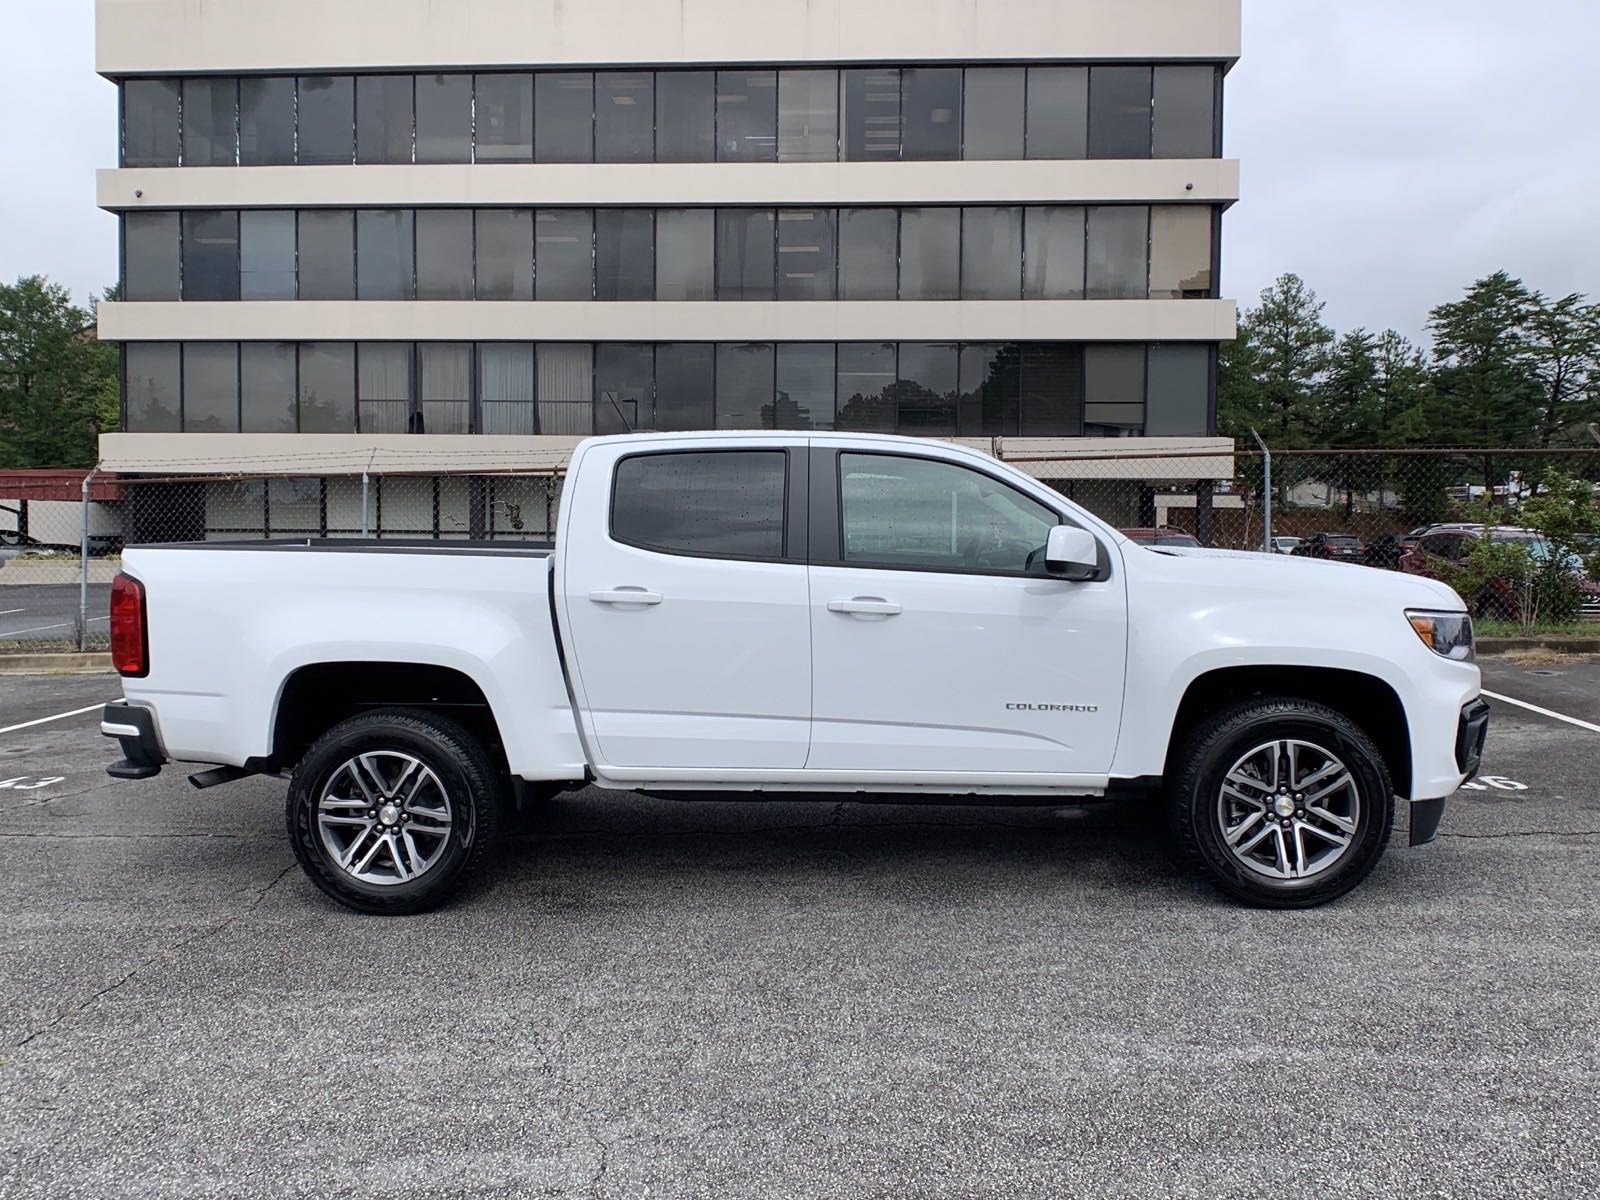 Pre Owned 2021 Chevrolet Colorado 2wd Work Truck Crew Cab Pickup In